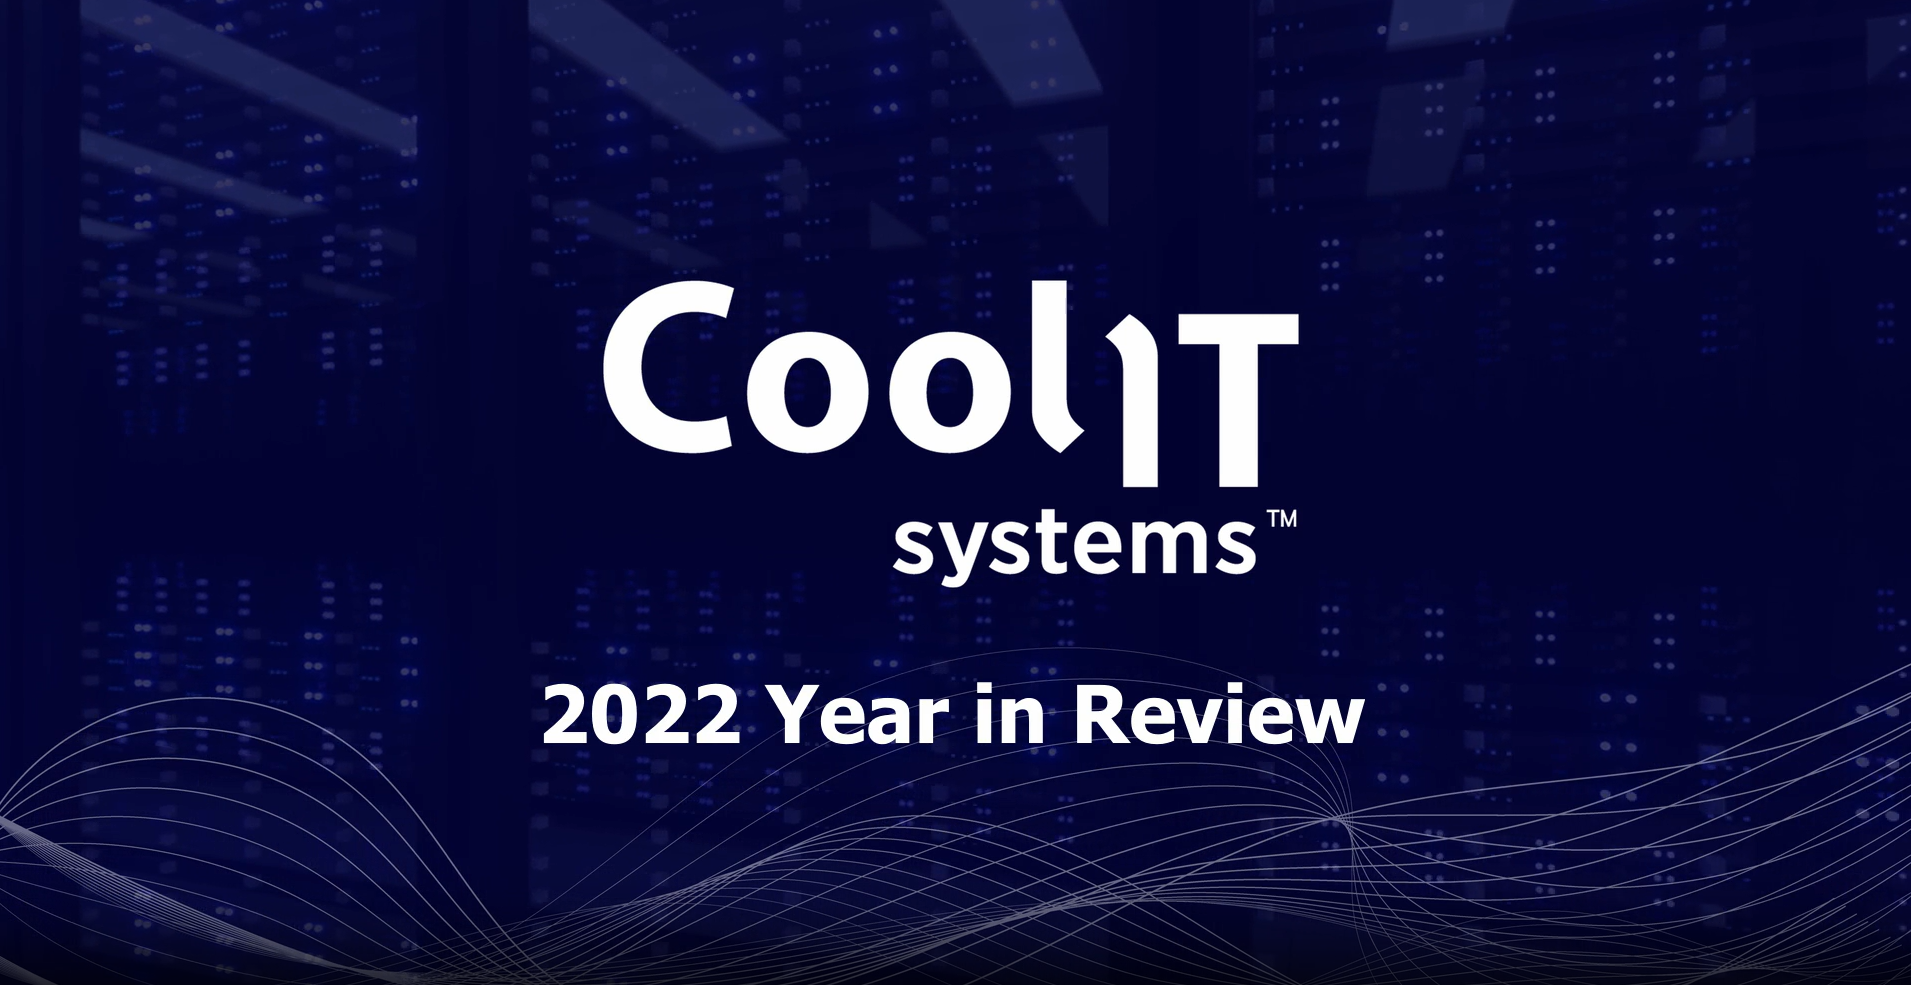 <strong>CoolIT Systems Reports Record Profitability and Growth in 2022</strong>” class=”posts-list-el__image”>
      </div>
<div class=